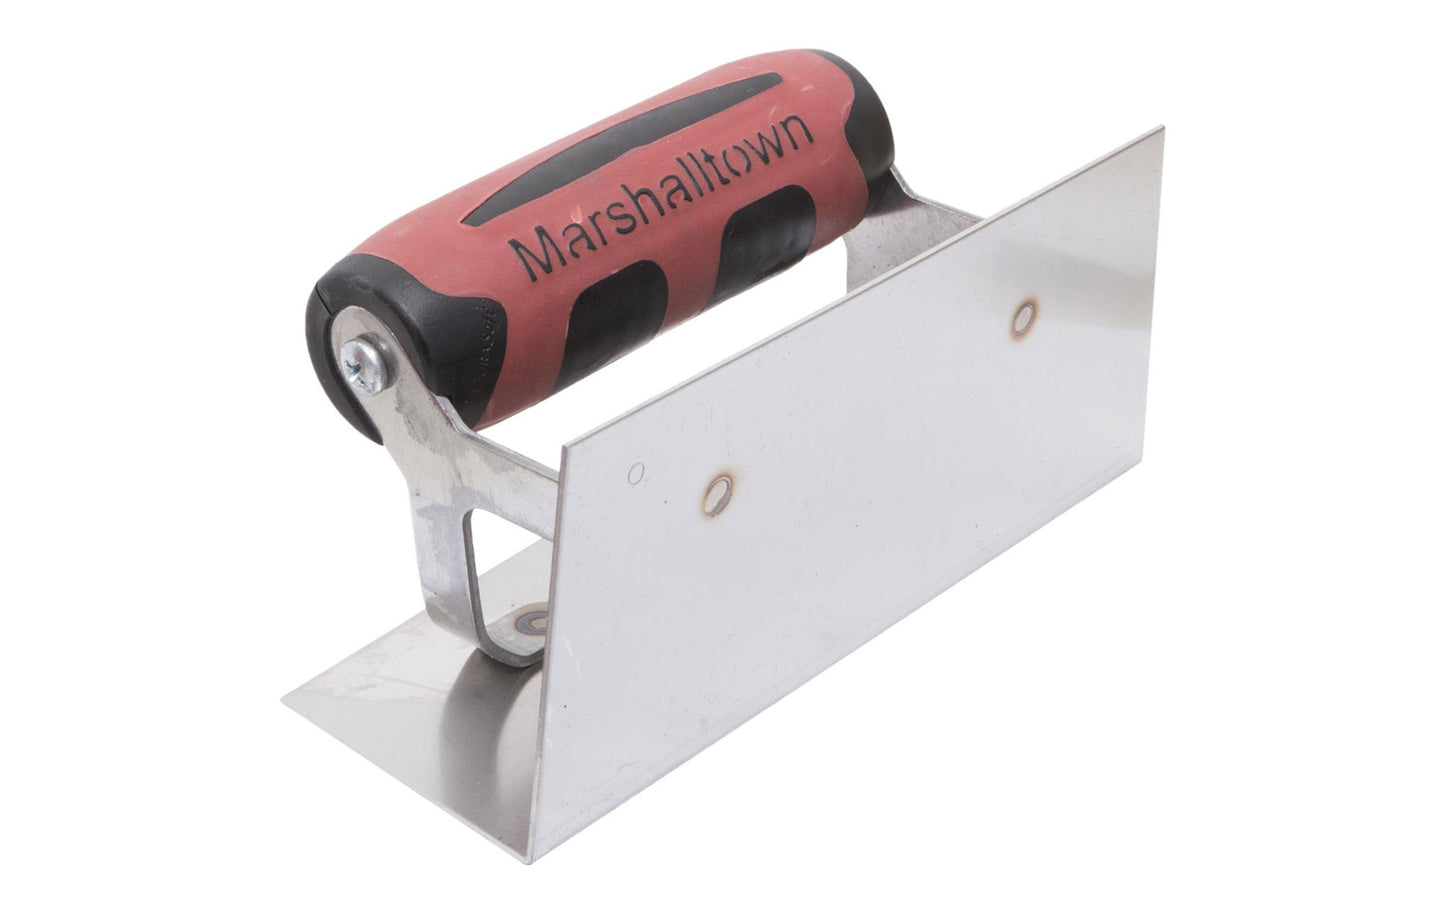 Marshalltown 6" x 2-1/2" Stainless Inside Corner Trowel. Ideal for creating sharp corners & edges on concrete steps or anywhere where square and rounded corners are needed. The stainless steel blade is durable, easy to clean, and is fitted with a comfortable soft grip "DuraSoft" handle that reduces fatigue when using this tool Model 65SSD ~ 035965041225